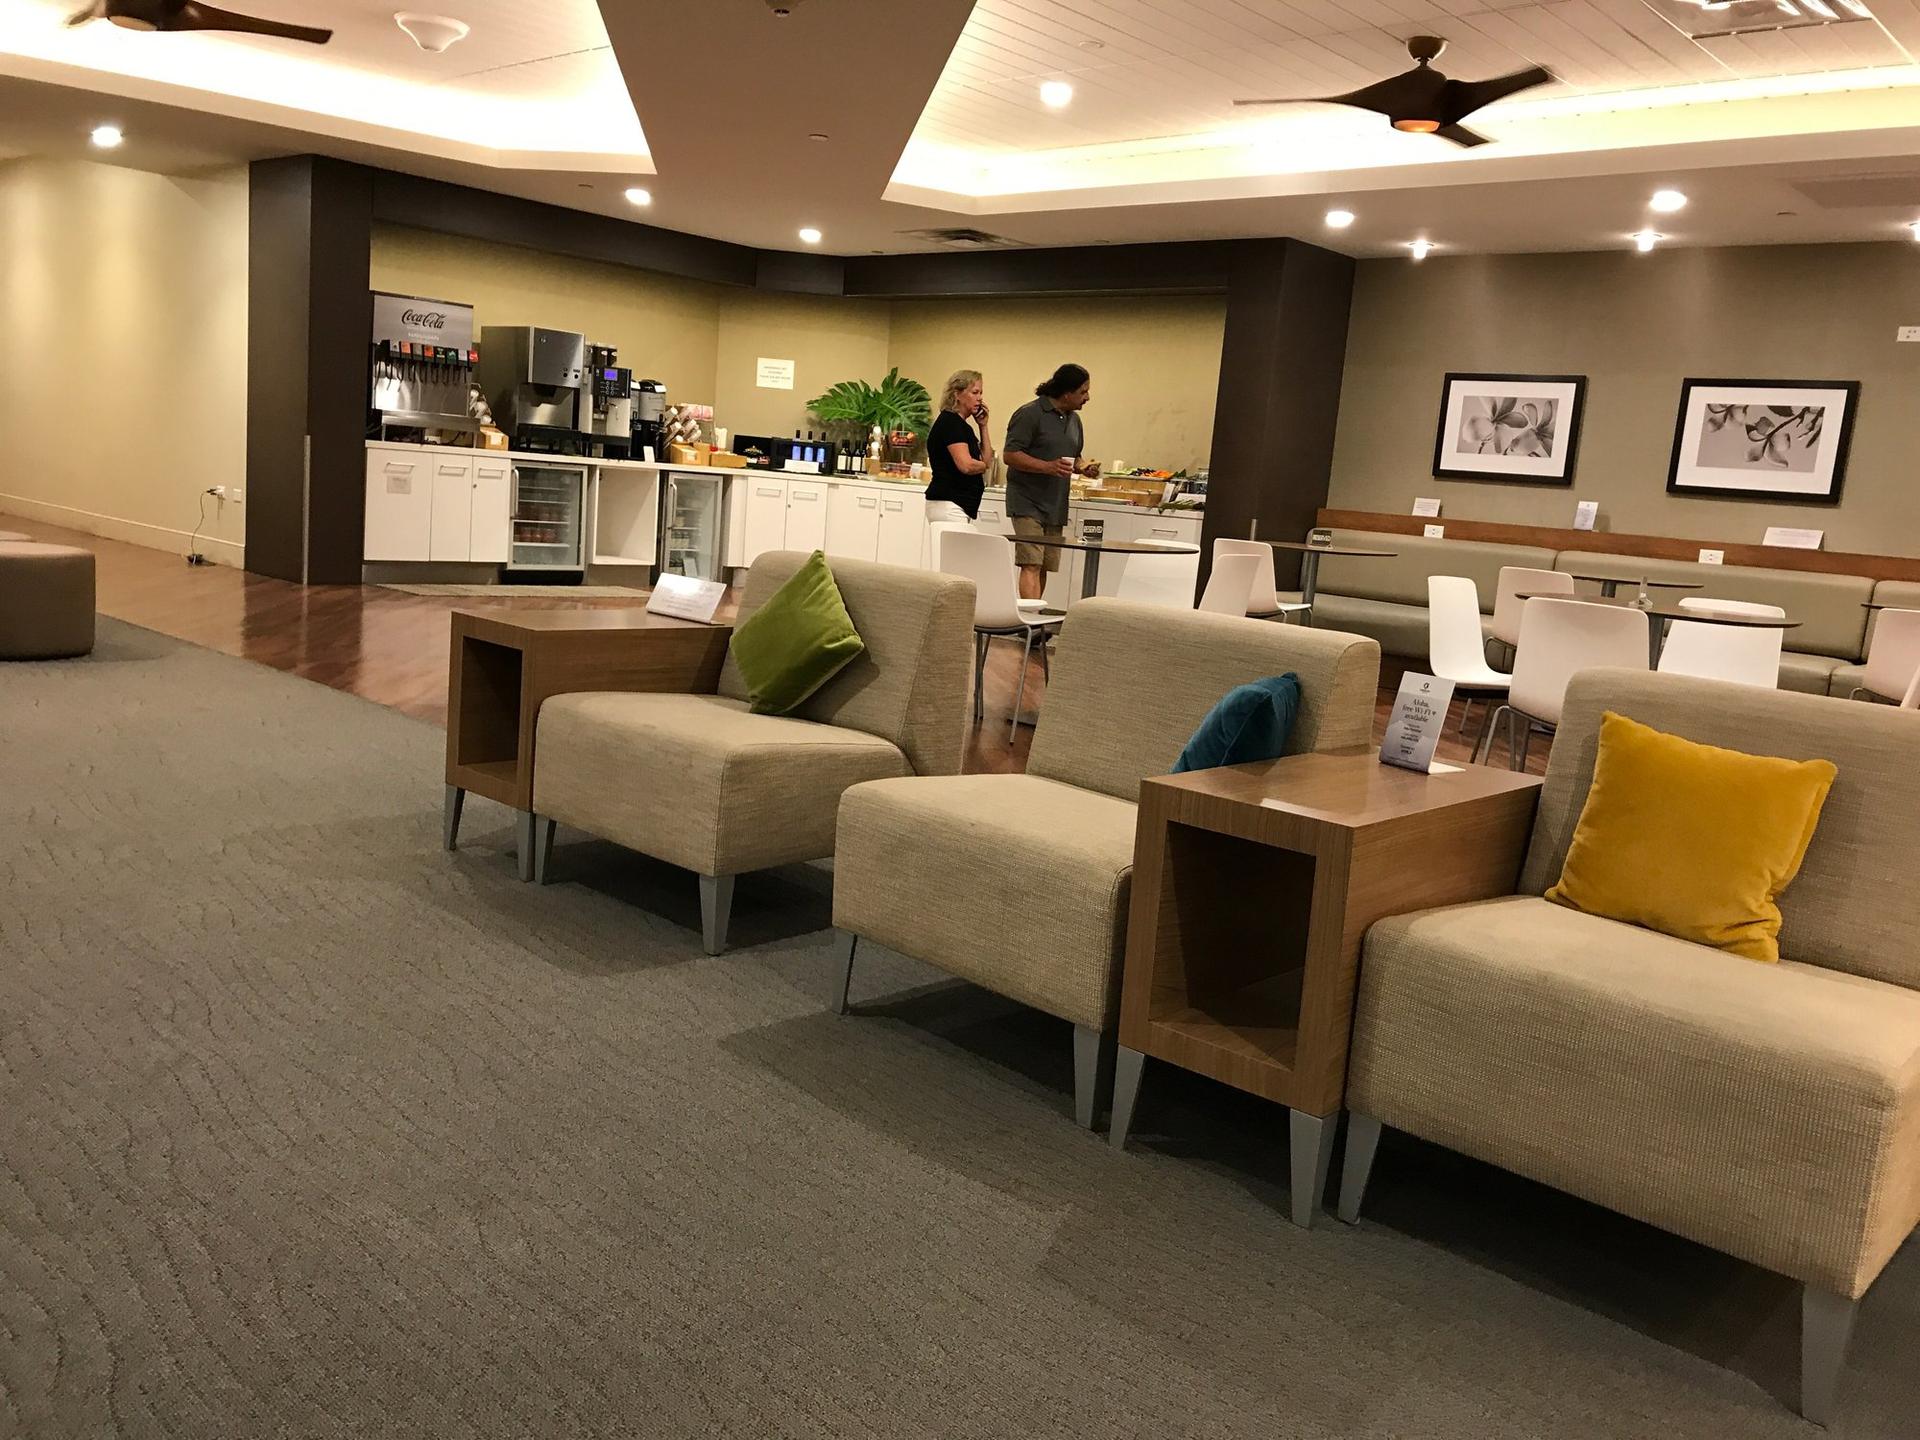 Hawaiian Airlines The Plumeria Lounge image 9 of 41